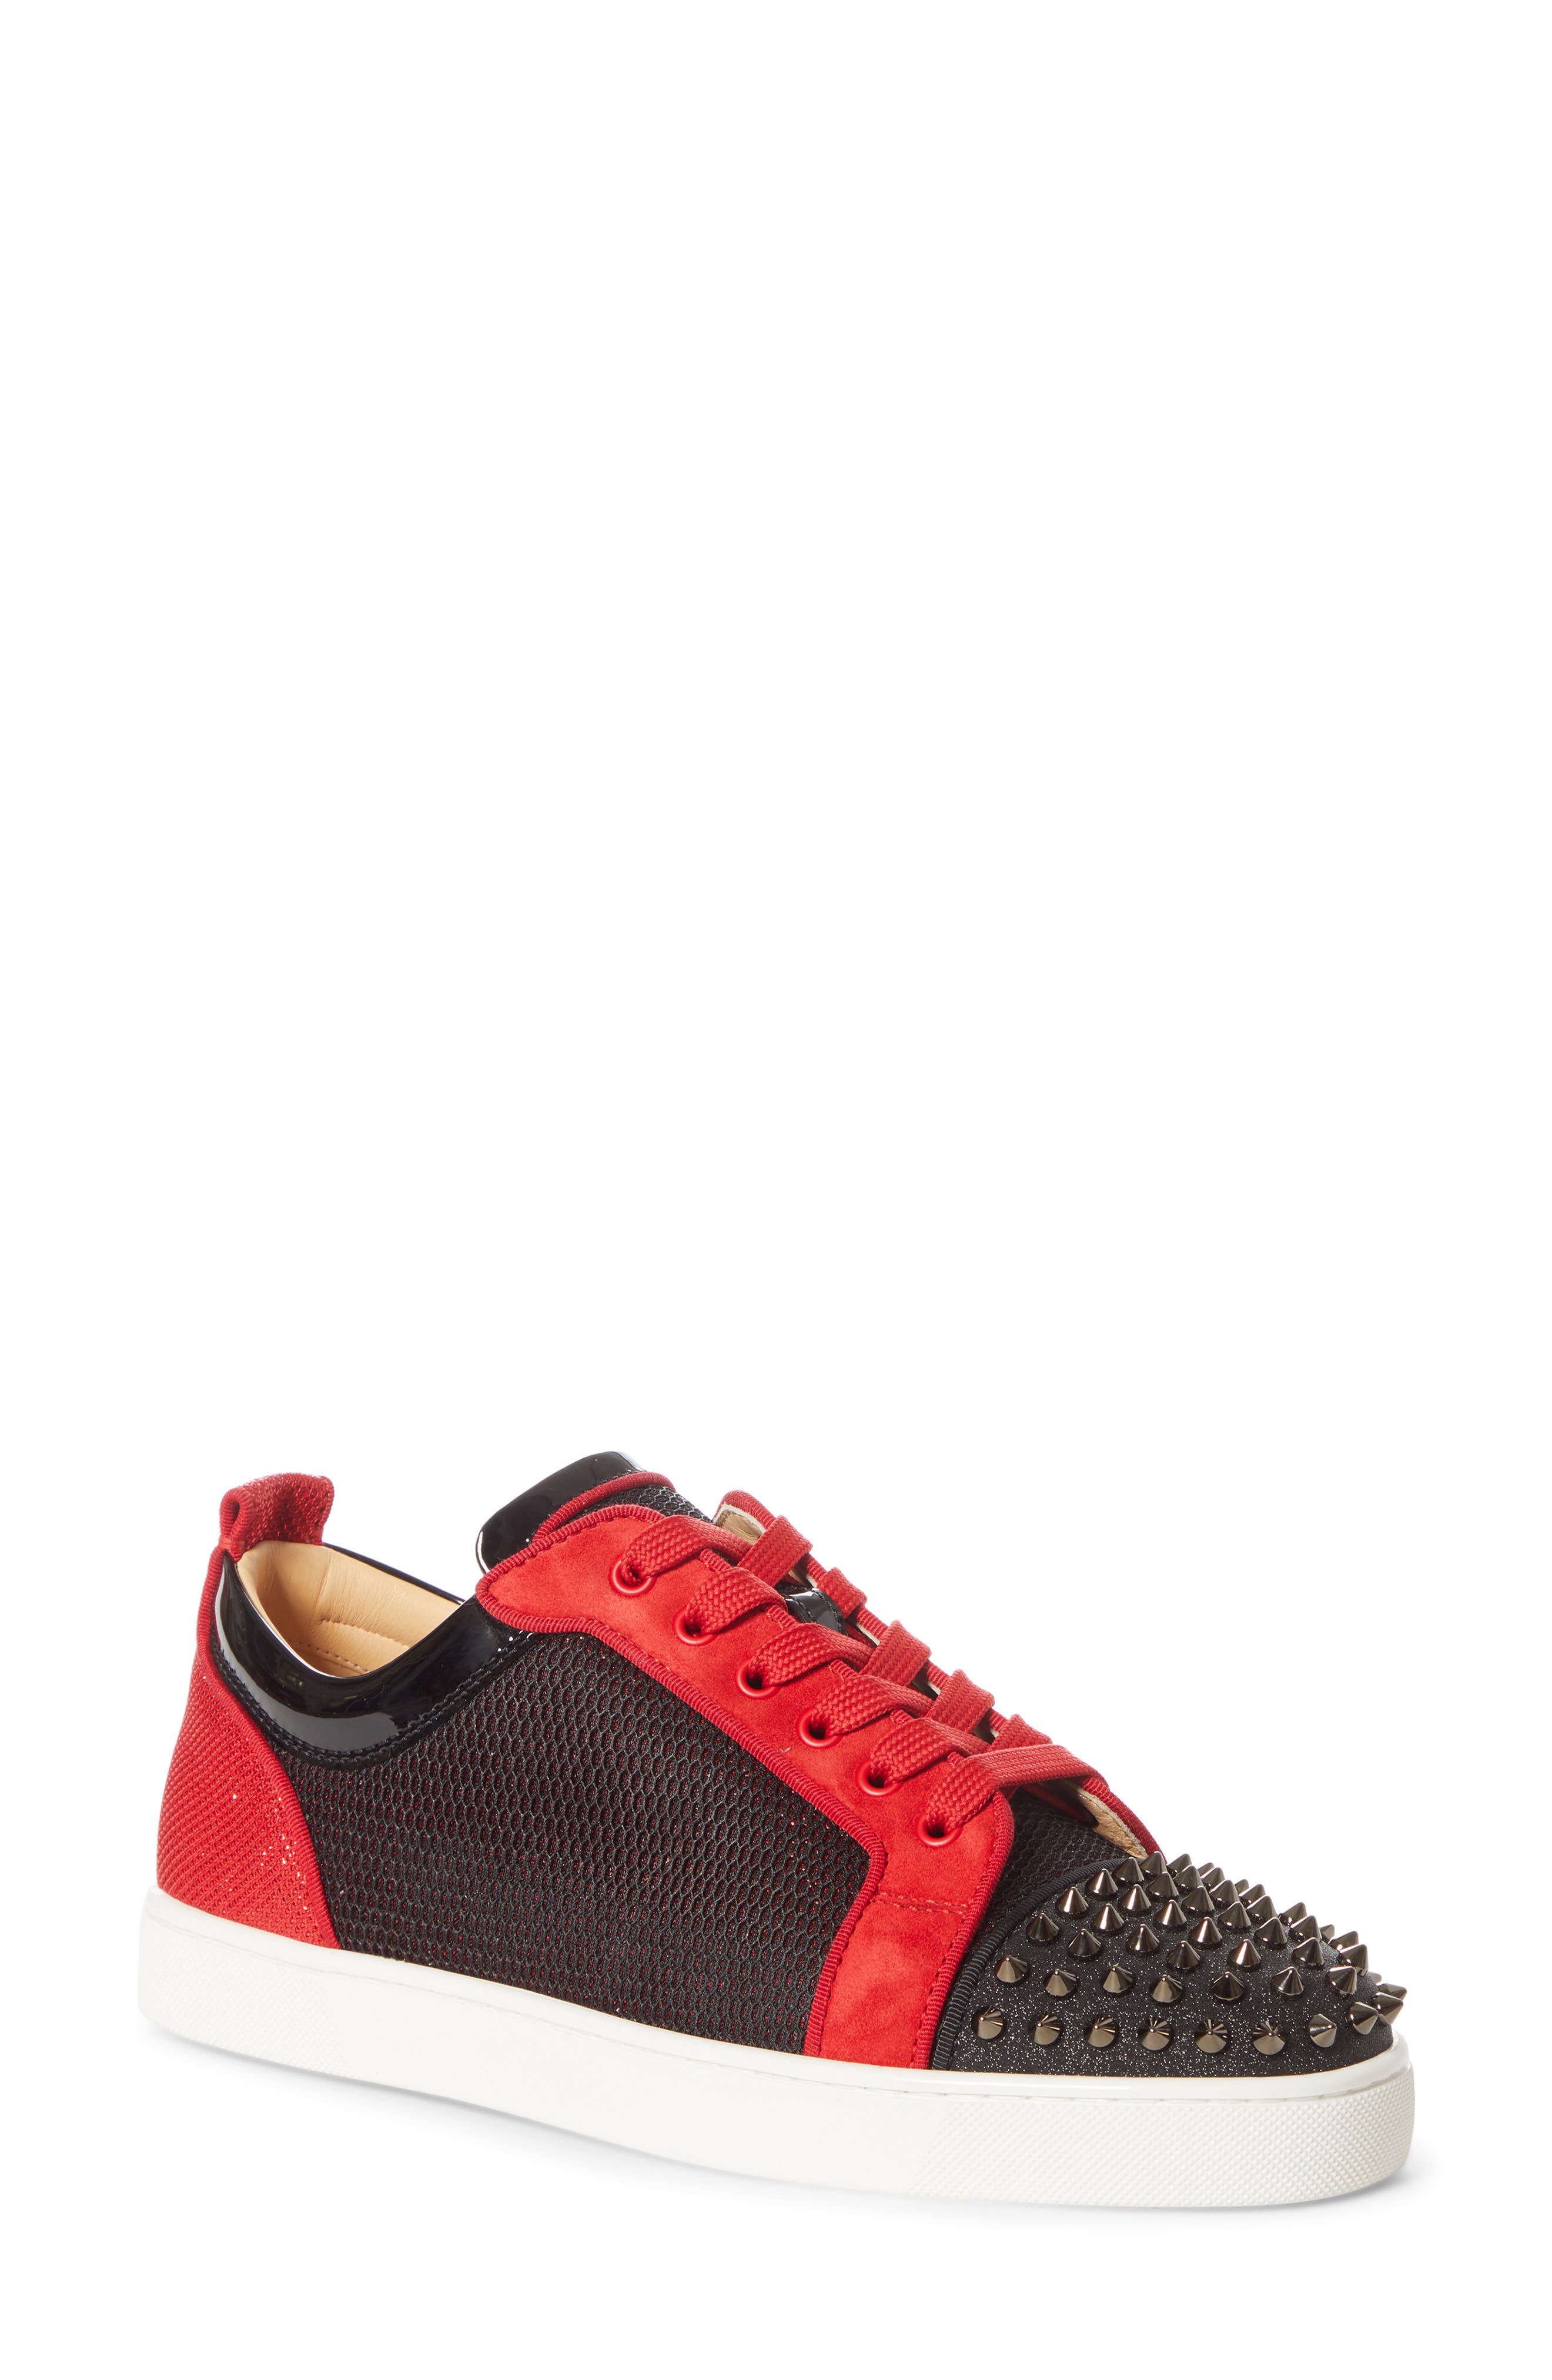 red sneakers with spikes